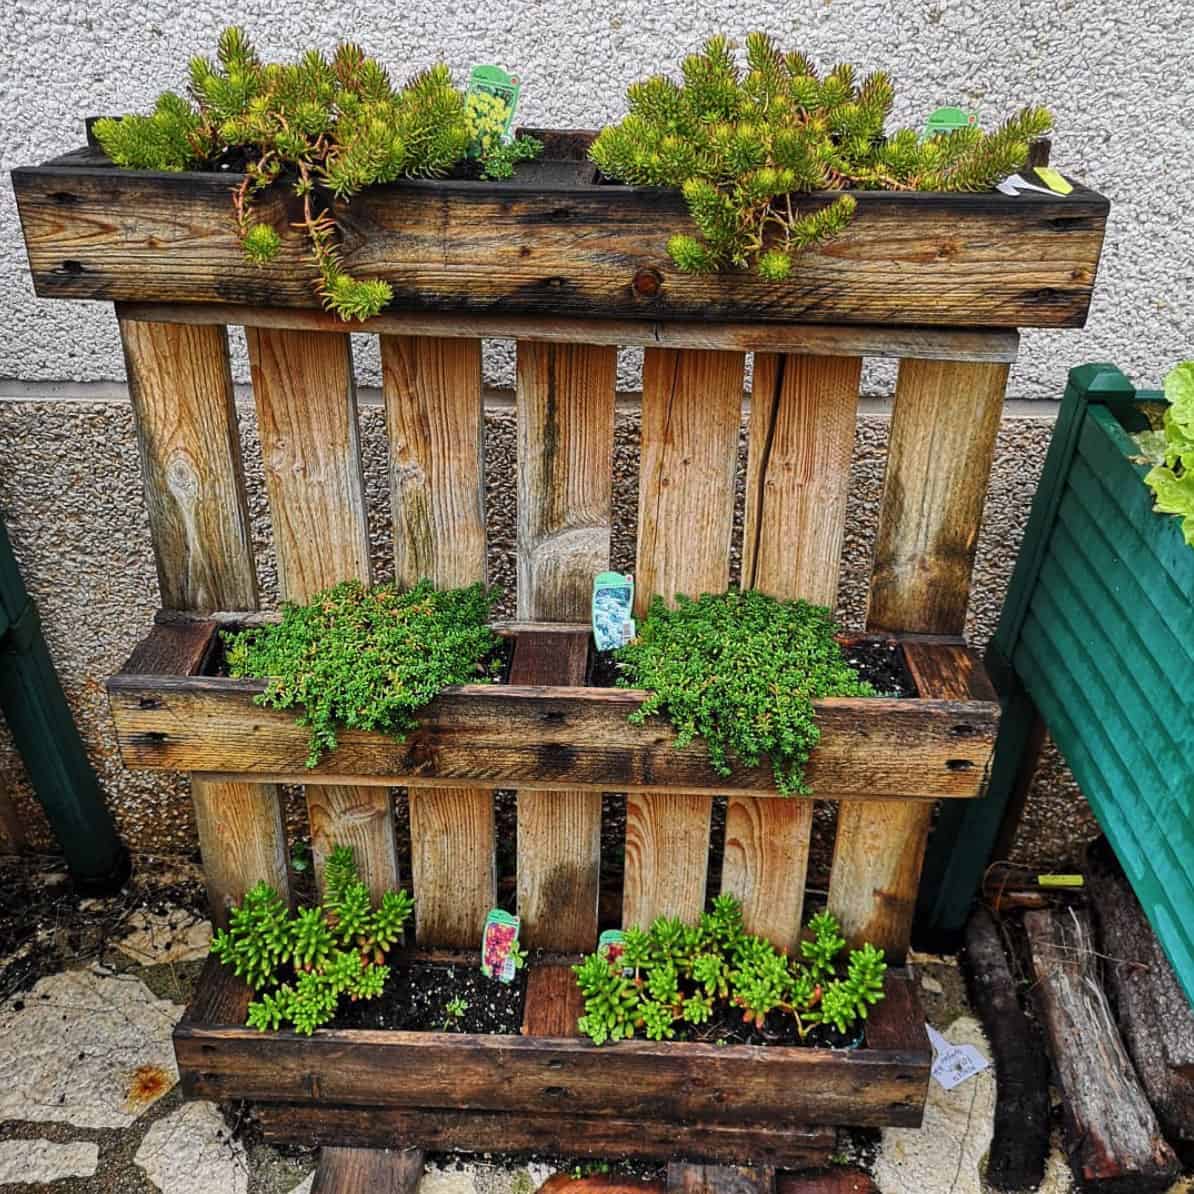 21 Spectacular Recycled Wood Pallet Garden Ideas To DIY